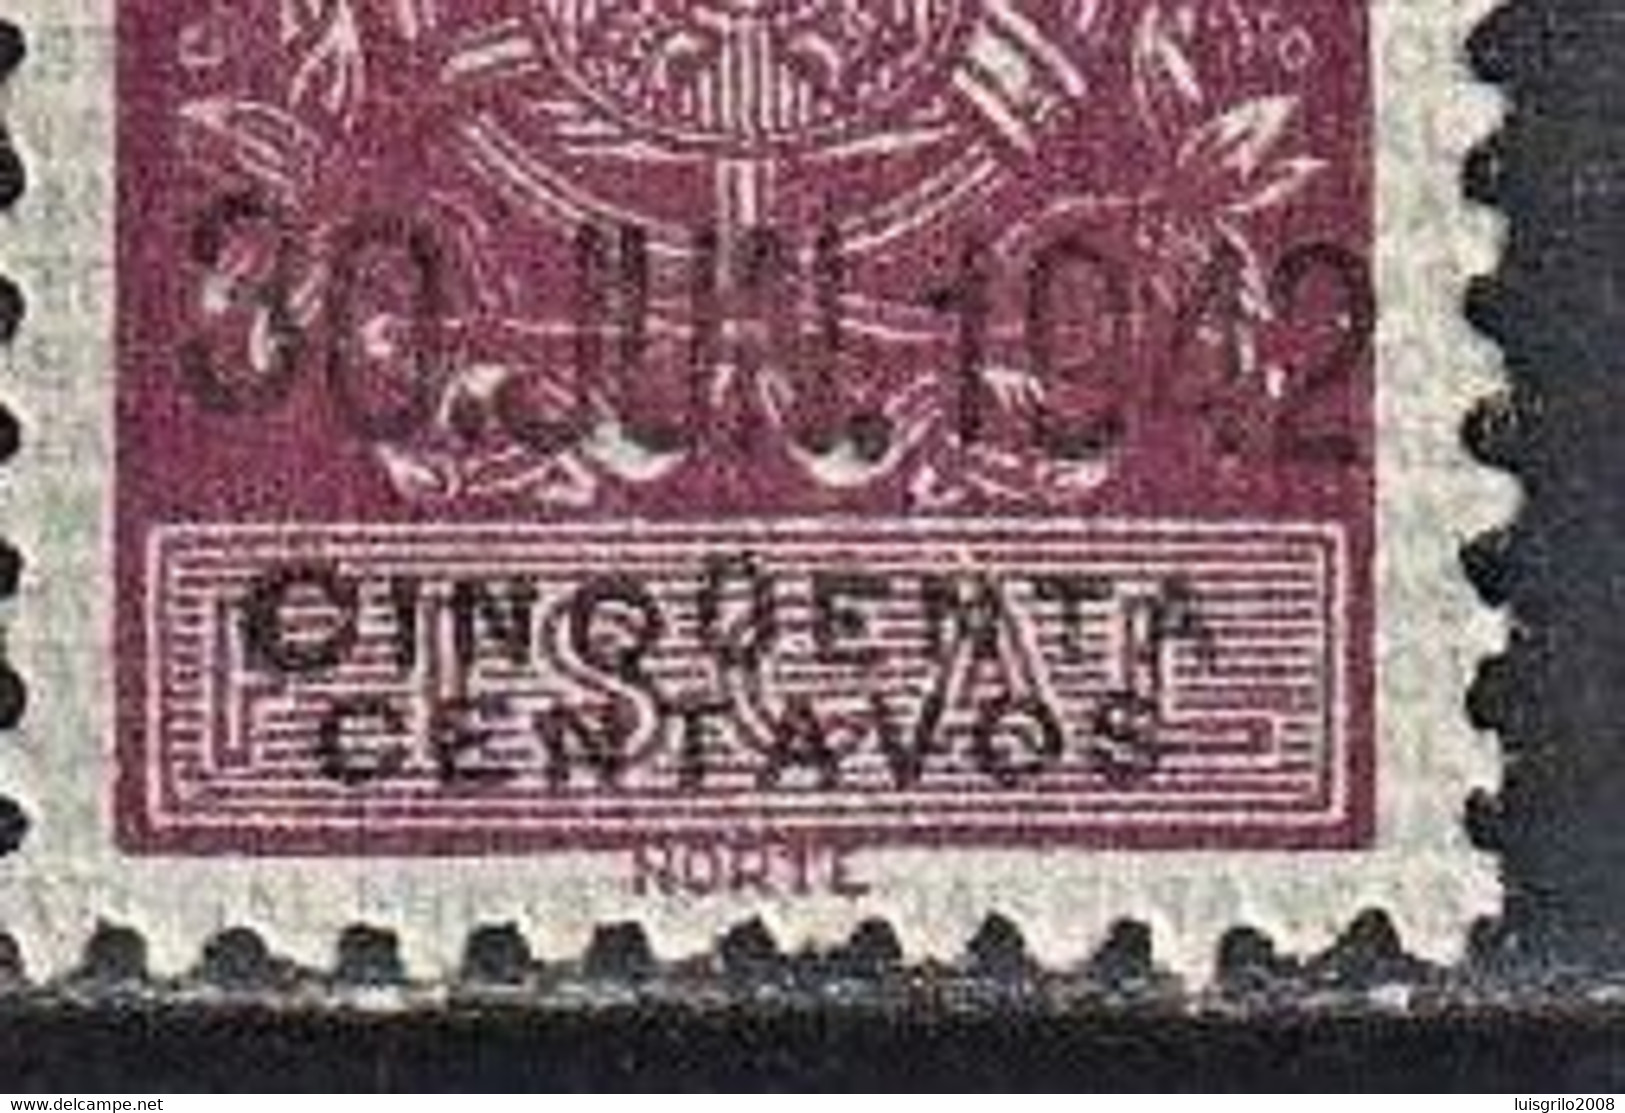 Fiscal/ Revenue, Portugal 1940 - Estampilha Fiscal -|- RARE STAMP - 0$50 Cinqüenta (Accents On The Letter U) - Used Stamps